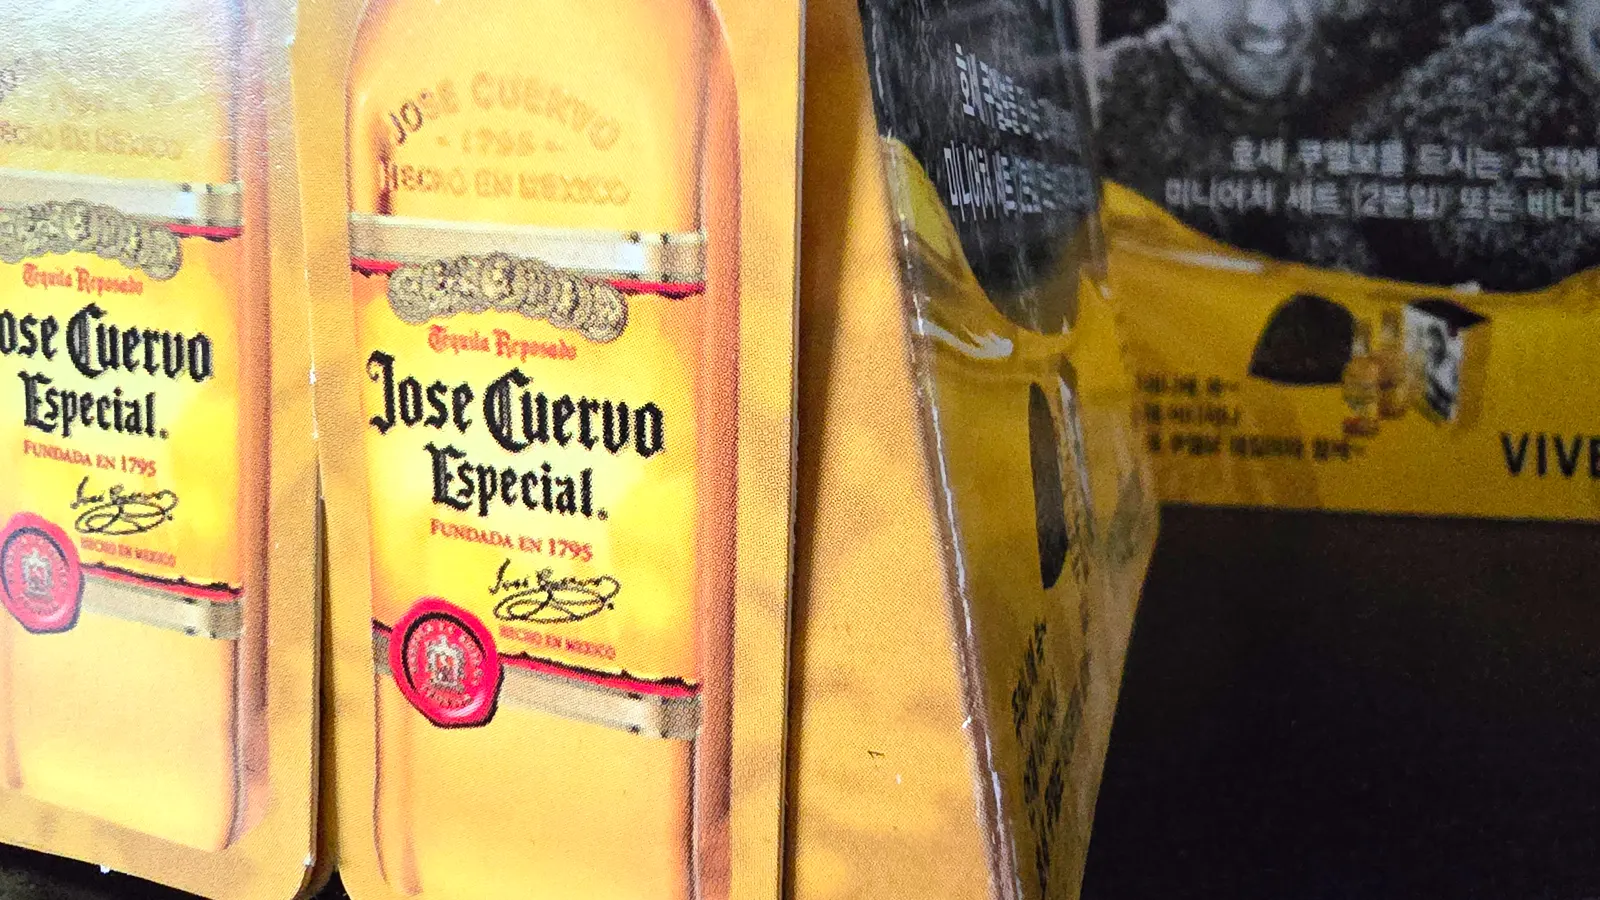 Jose Cuervo Package Design Agency - ADDVALUN by INTERDCOMM